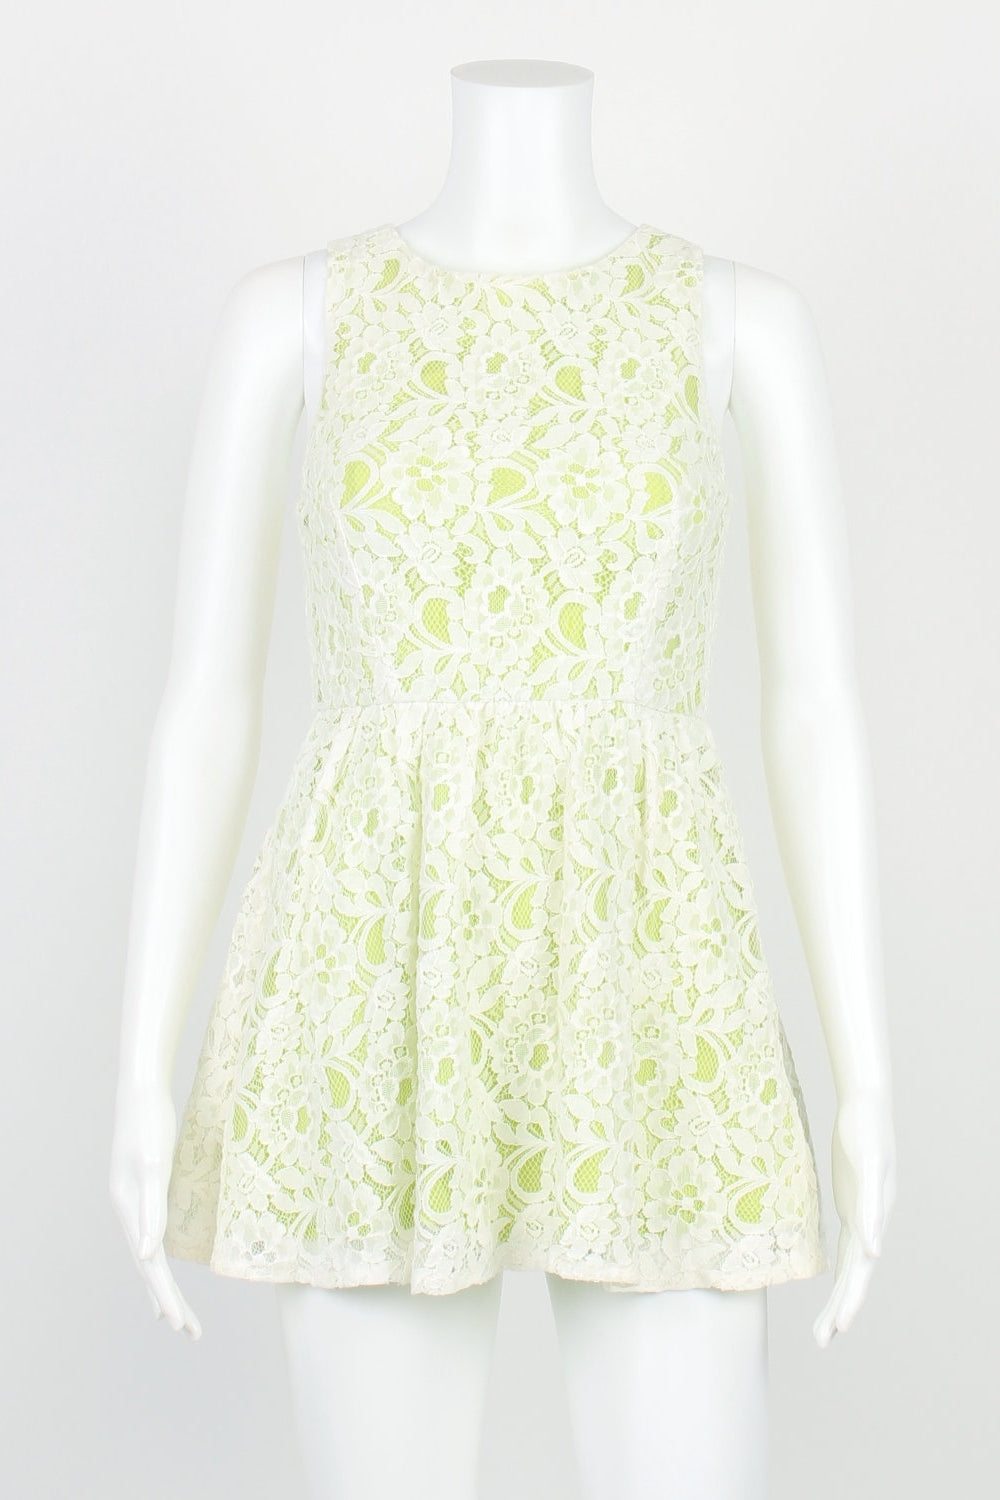 Topshop White And Green Sleeveless Lace Dress 6